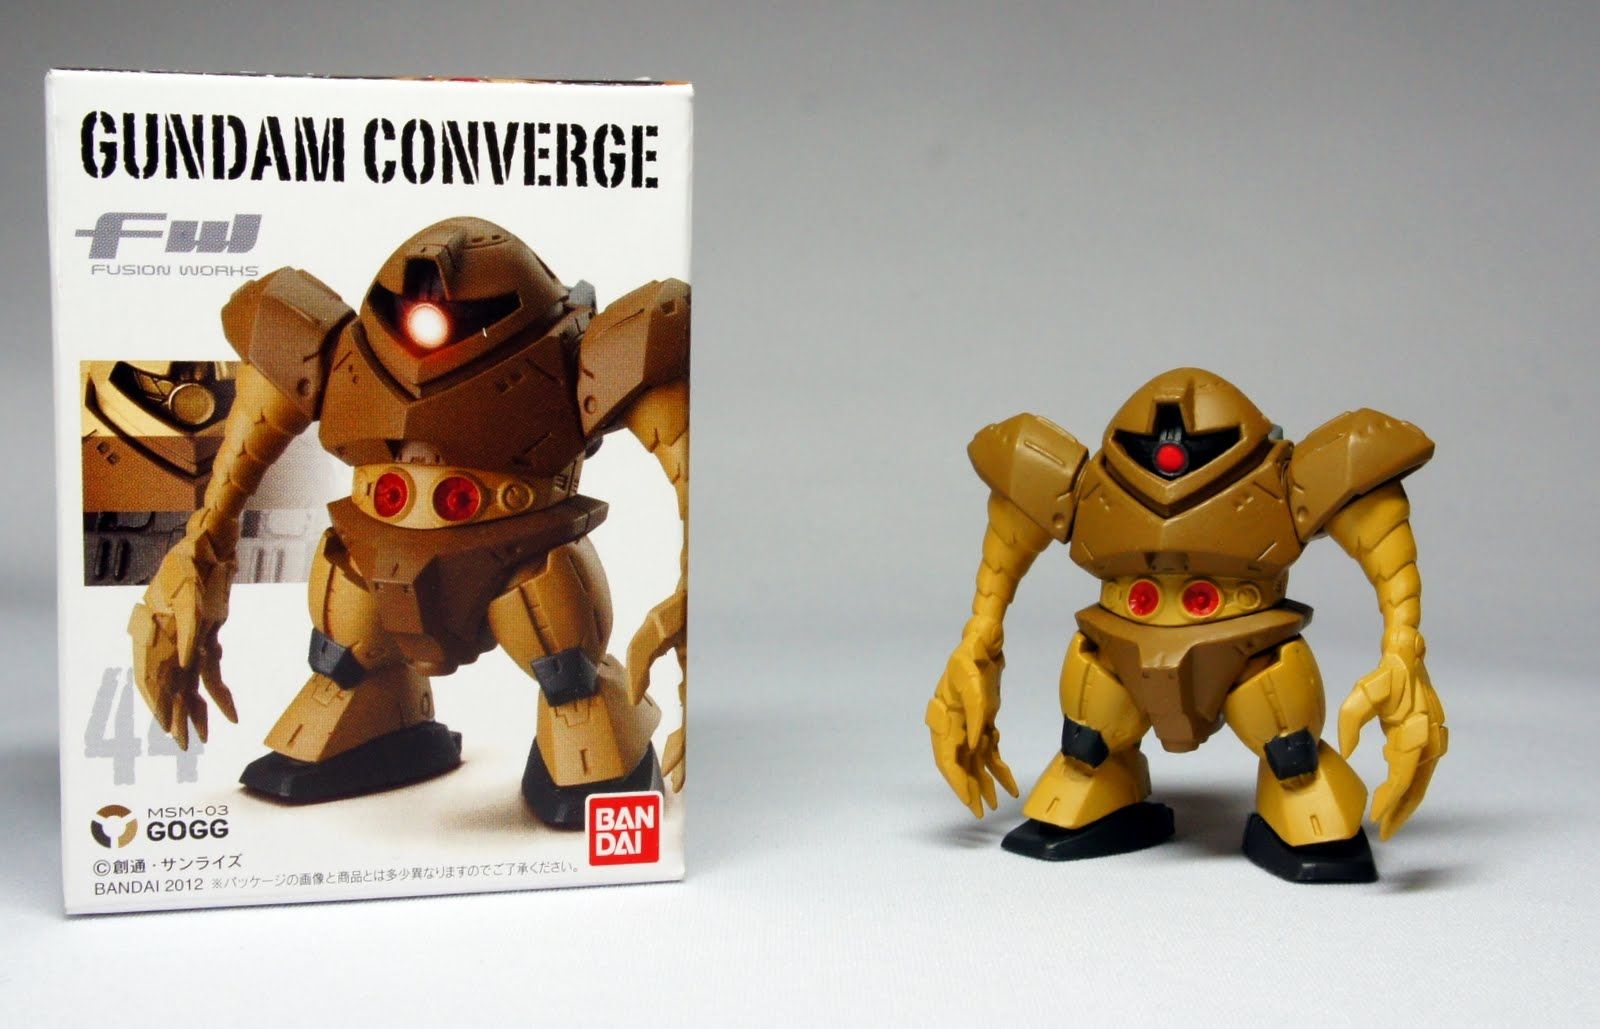 FW Gundam CONVERGE GOGG: Photoreview No.9 Wallpaper Size Images ...